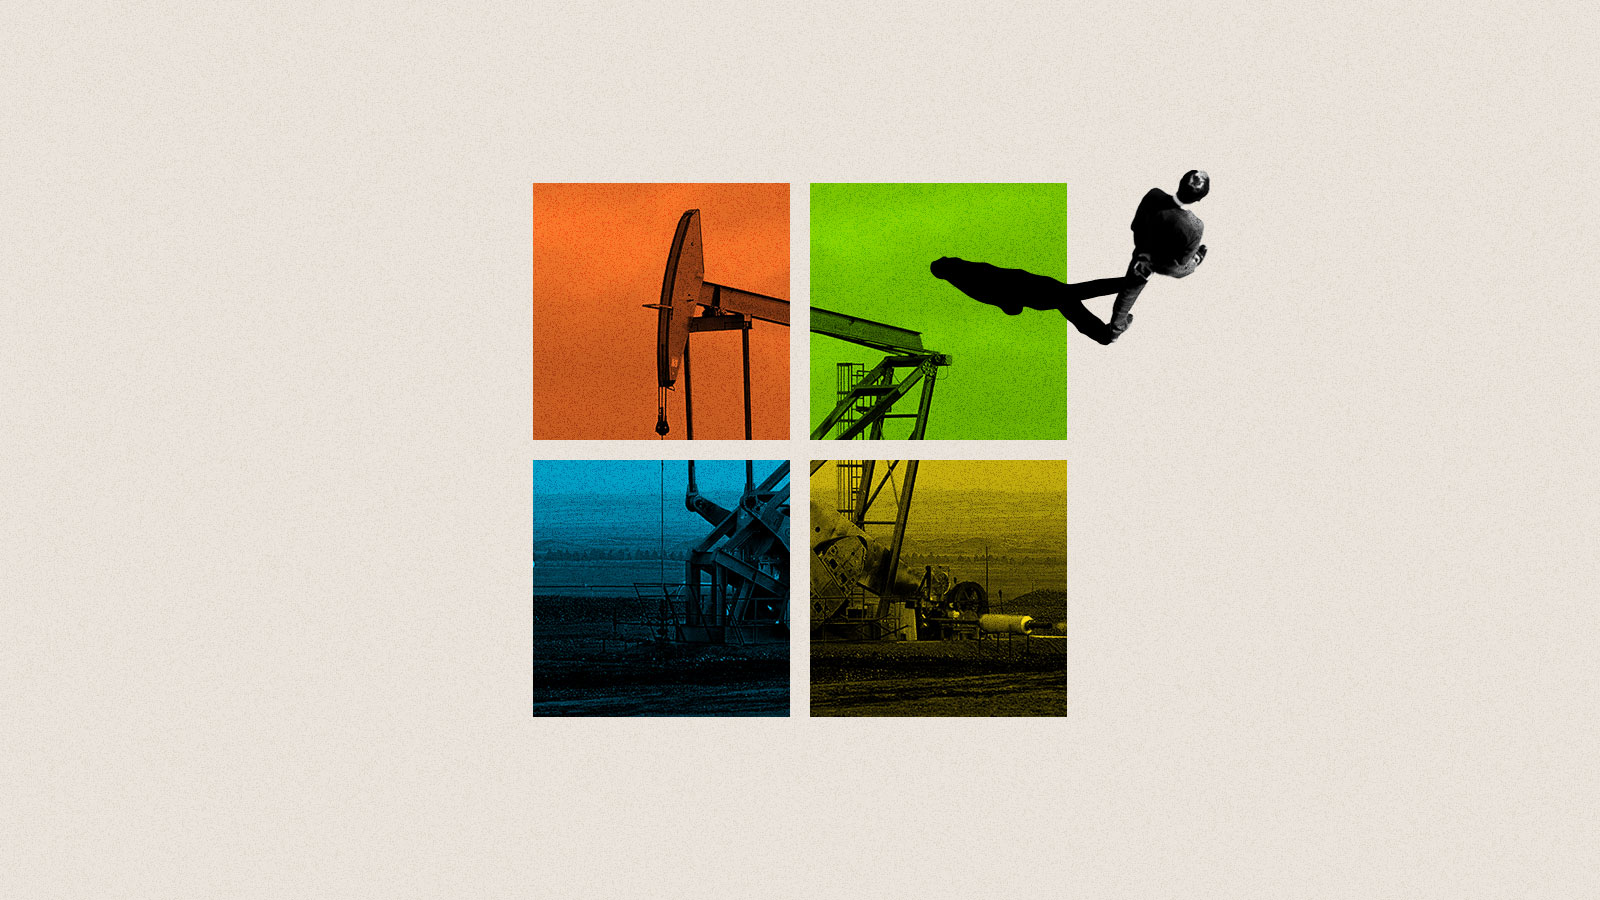 photo of Microsoft employees spent years fighting the tech giant’s oil ties. Now, they’re speaking out. image